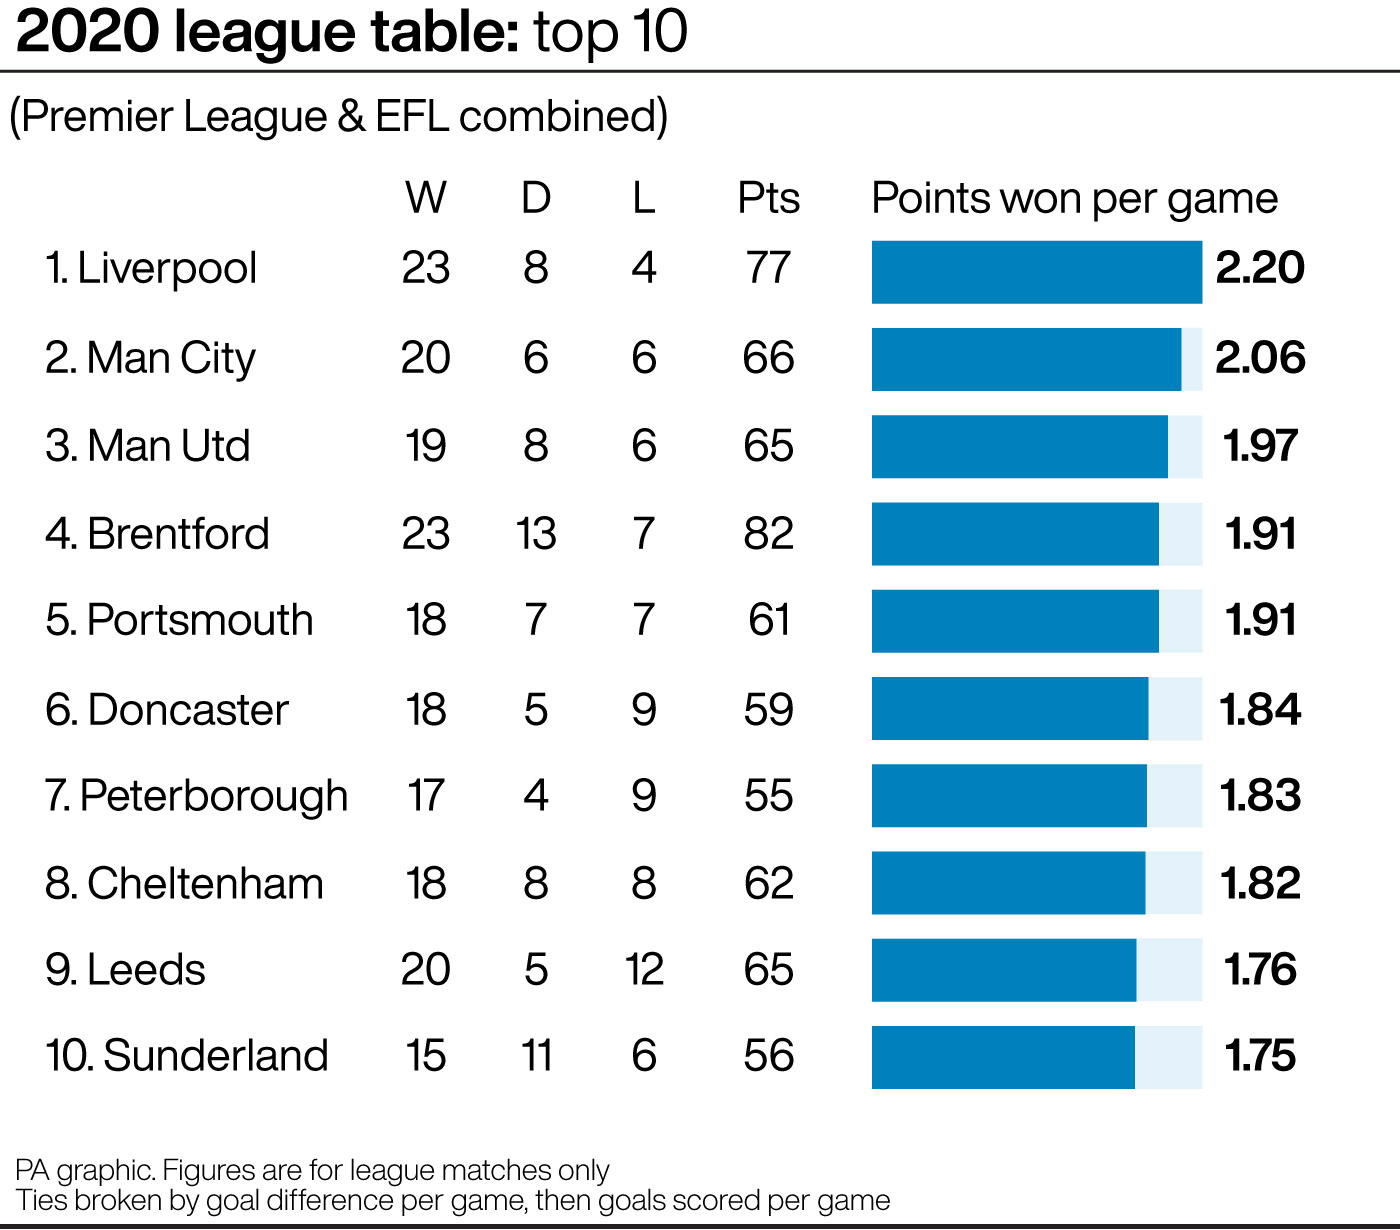 A graphic showing the top 10 in the 2020 league table